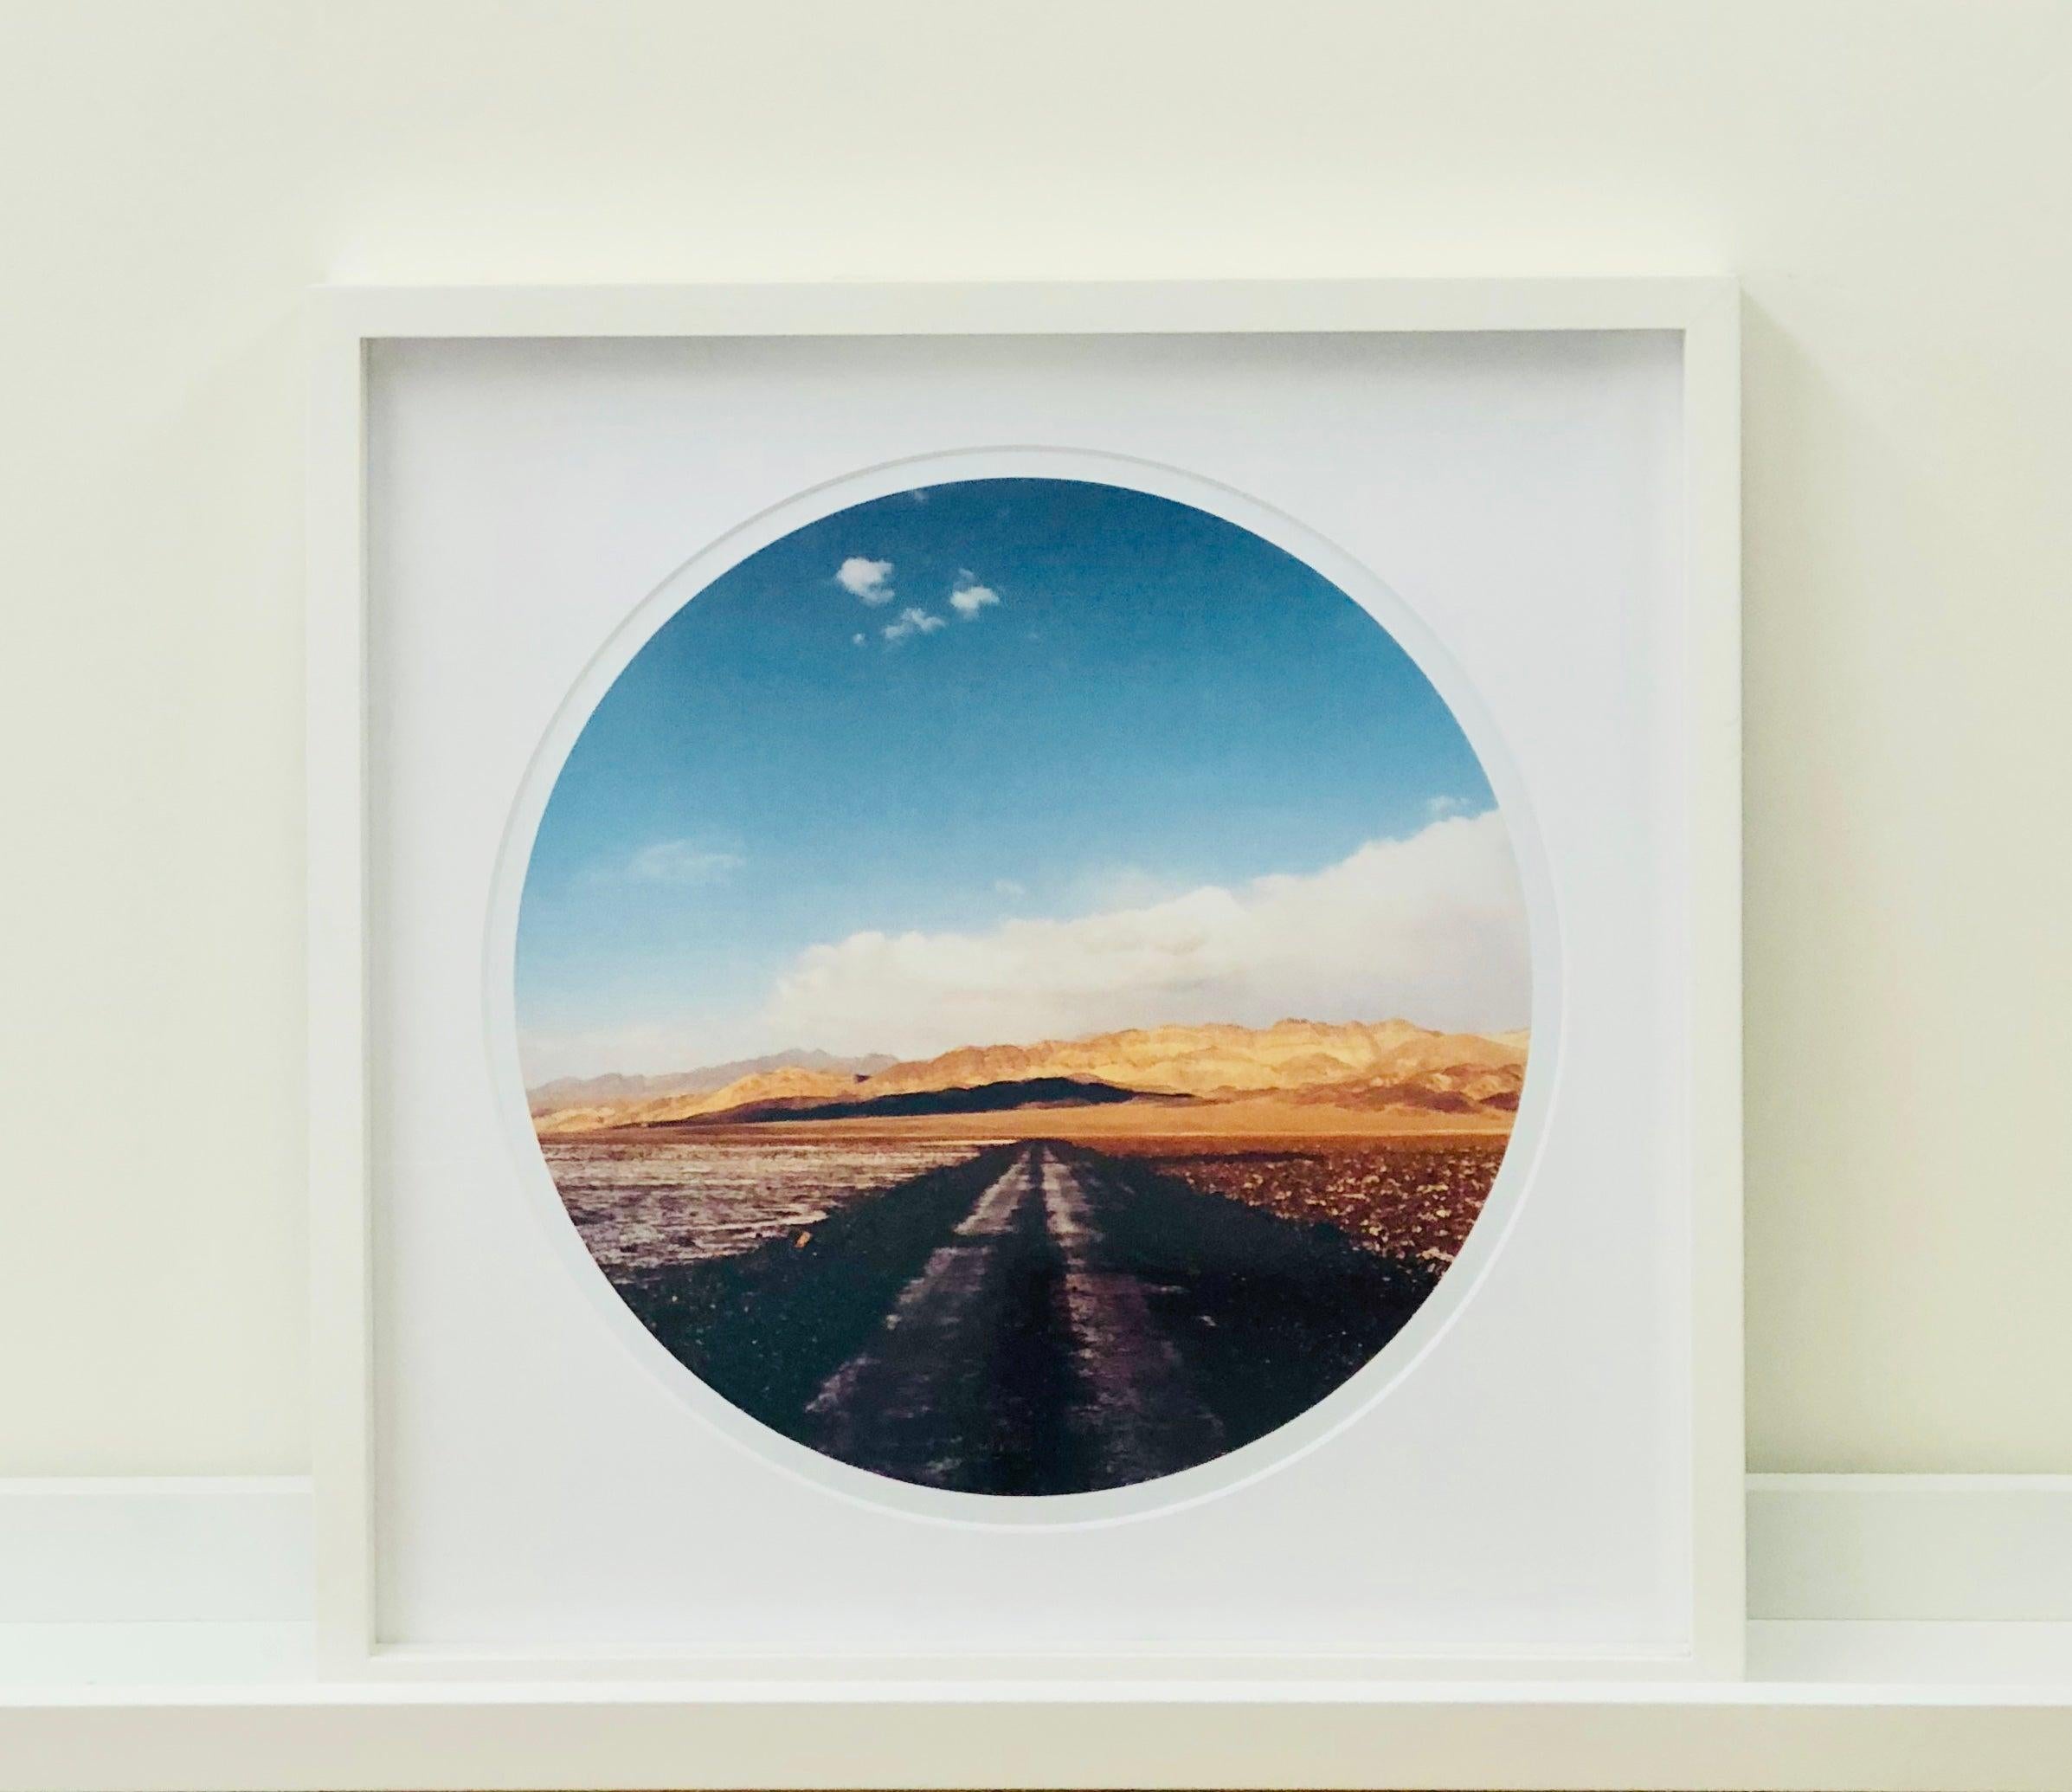 Titled the 'Sundance Series', these artworks are a development of traditional landscape photographs and they have created a unique perspective as if captured through a telescope or a porthole. Photographed in California, Arizona and Utah  these were